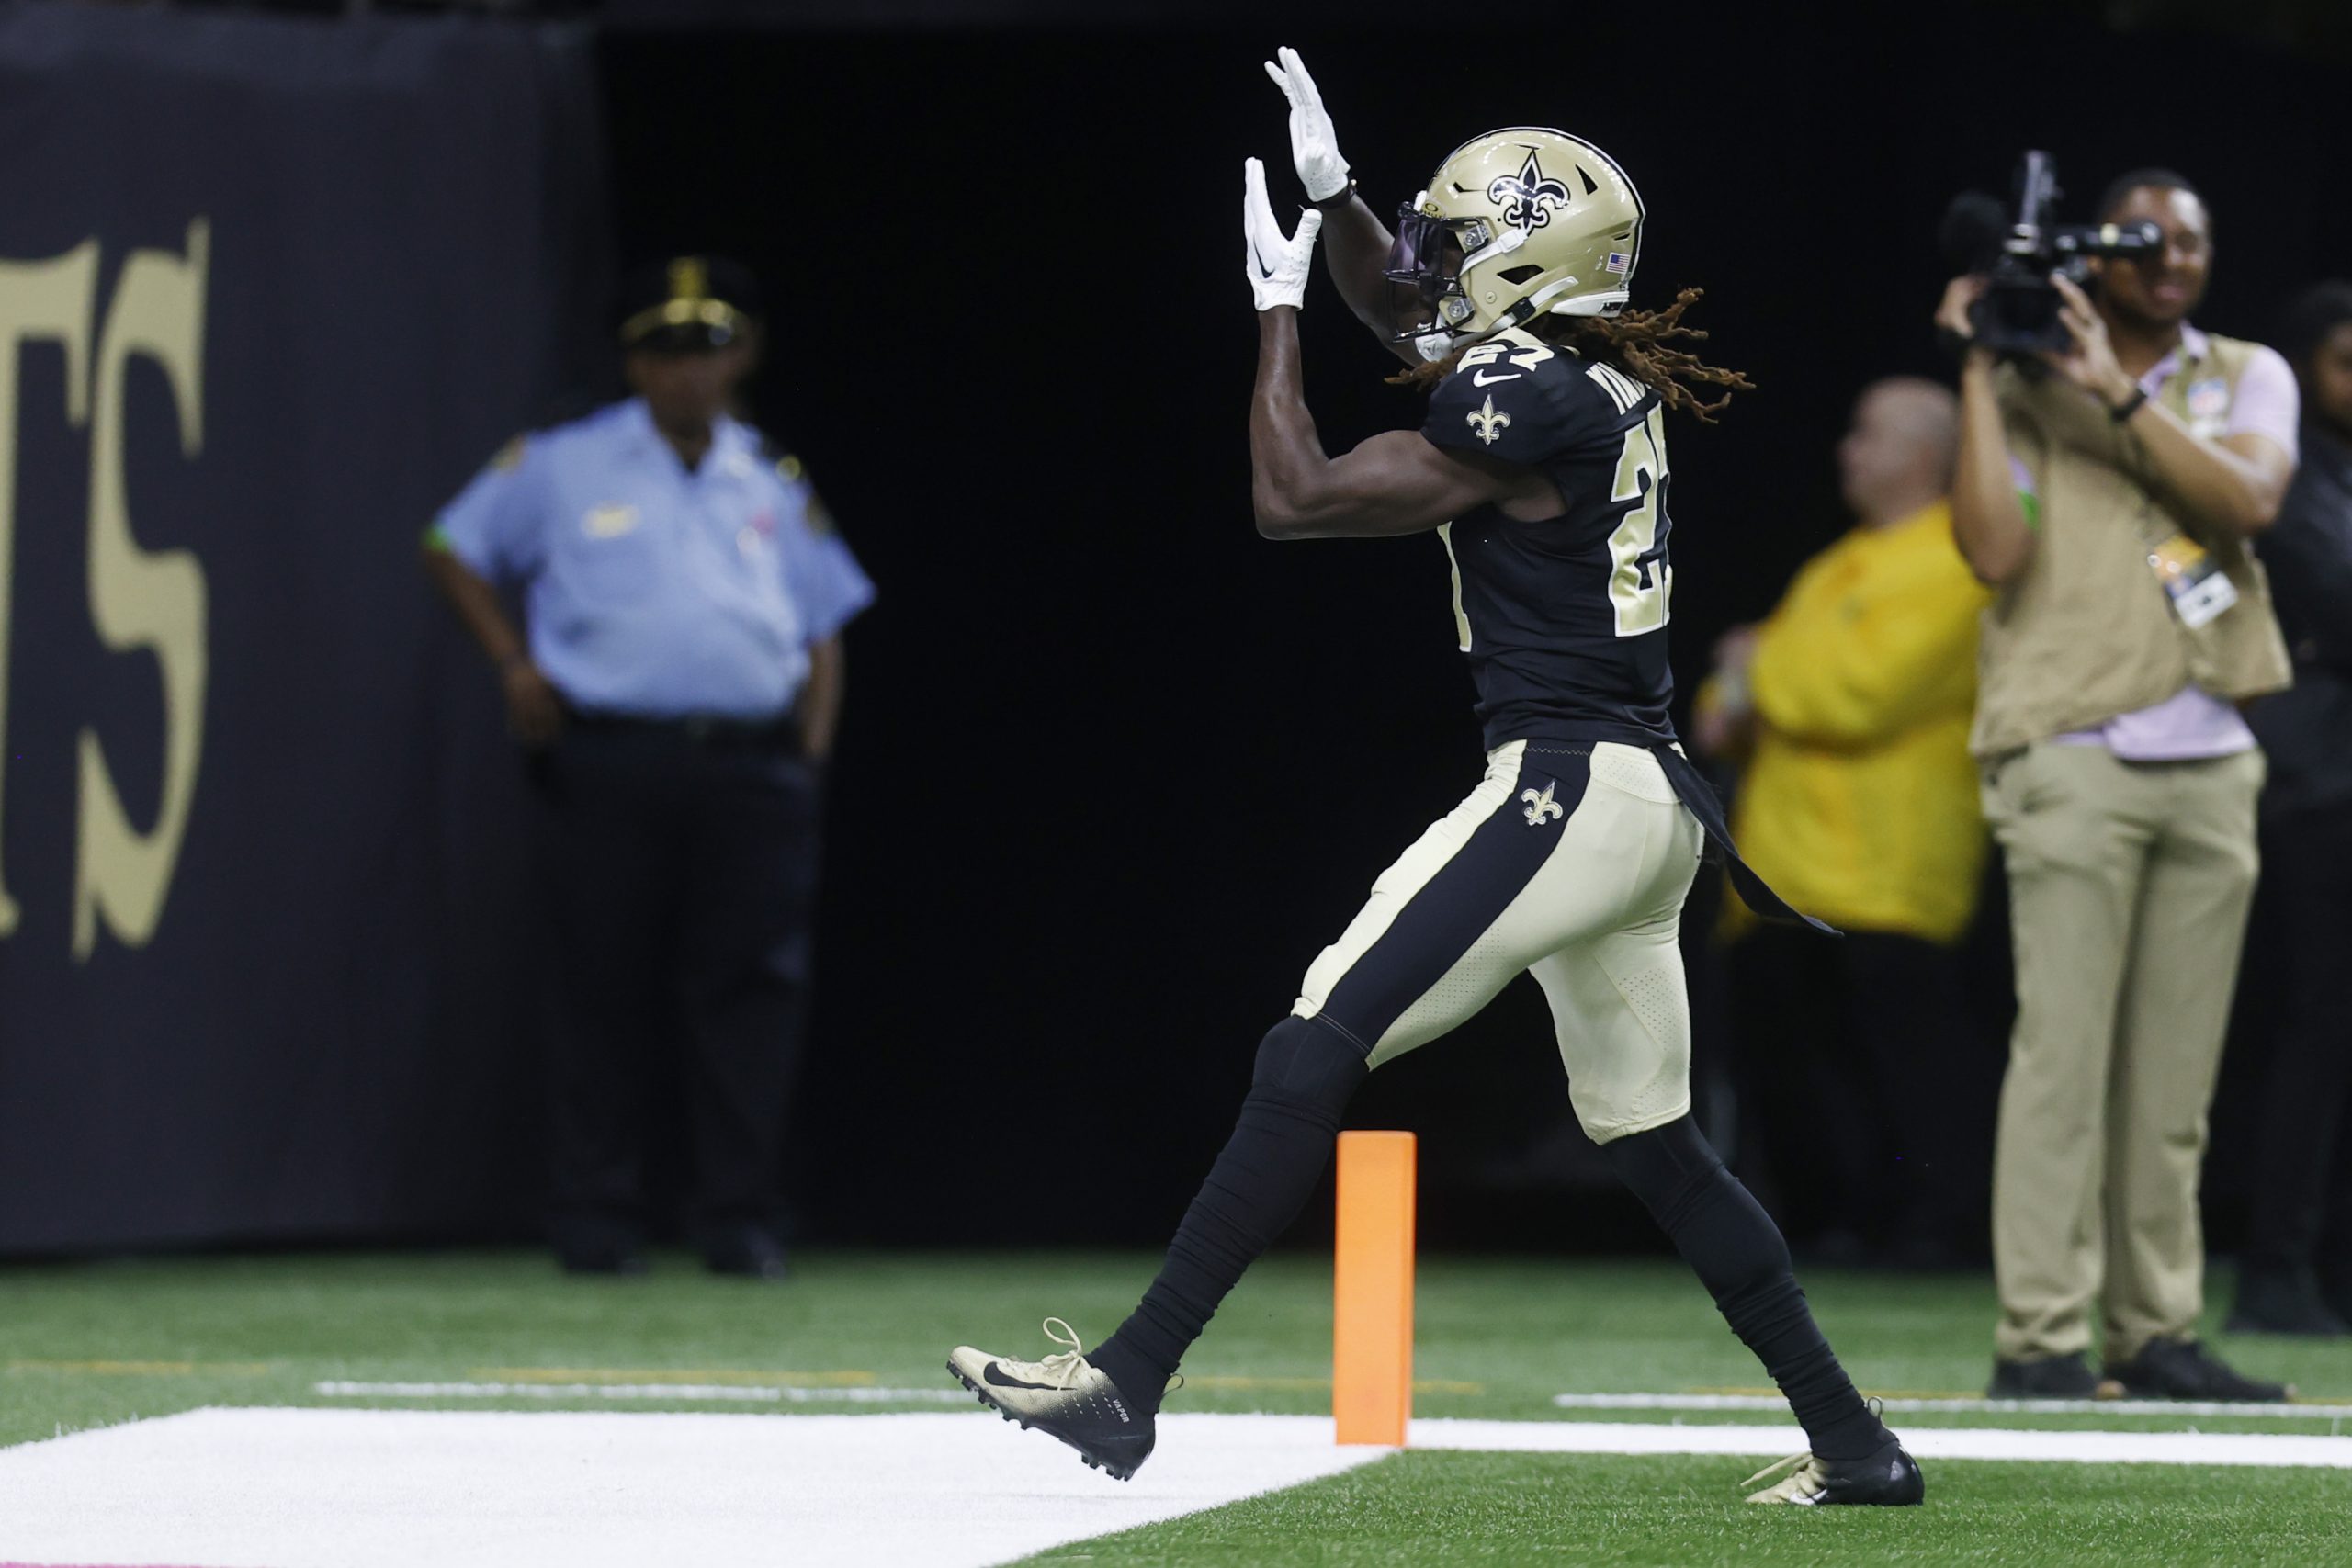 Reports: 49ers sign CB Isaac Yiadom on one-year deal